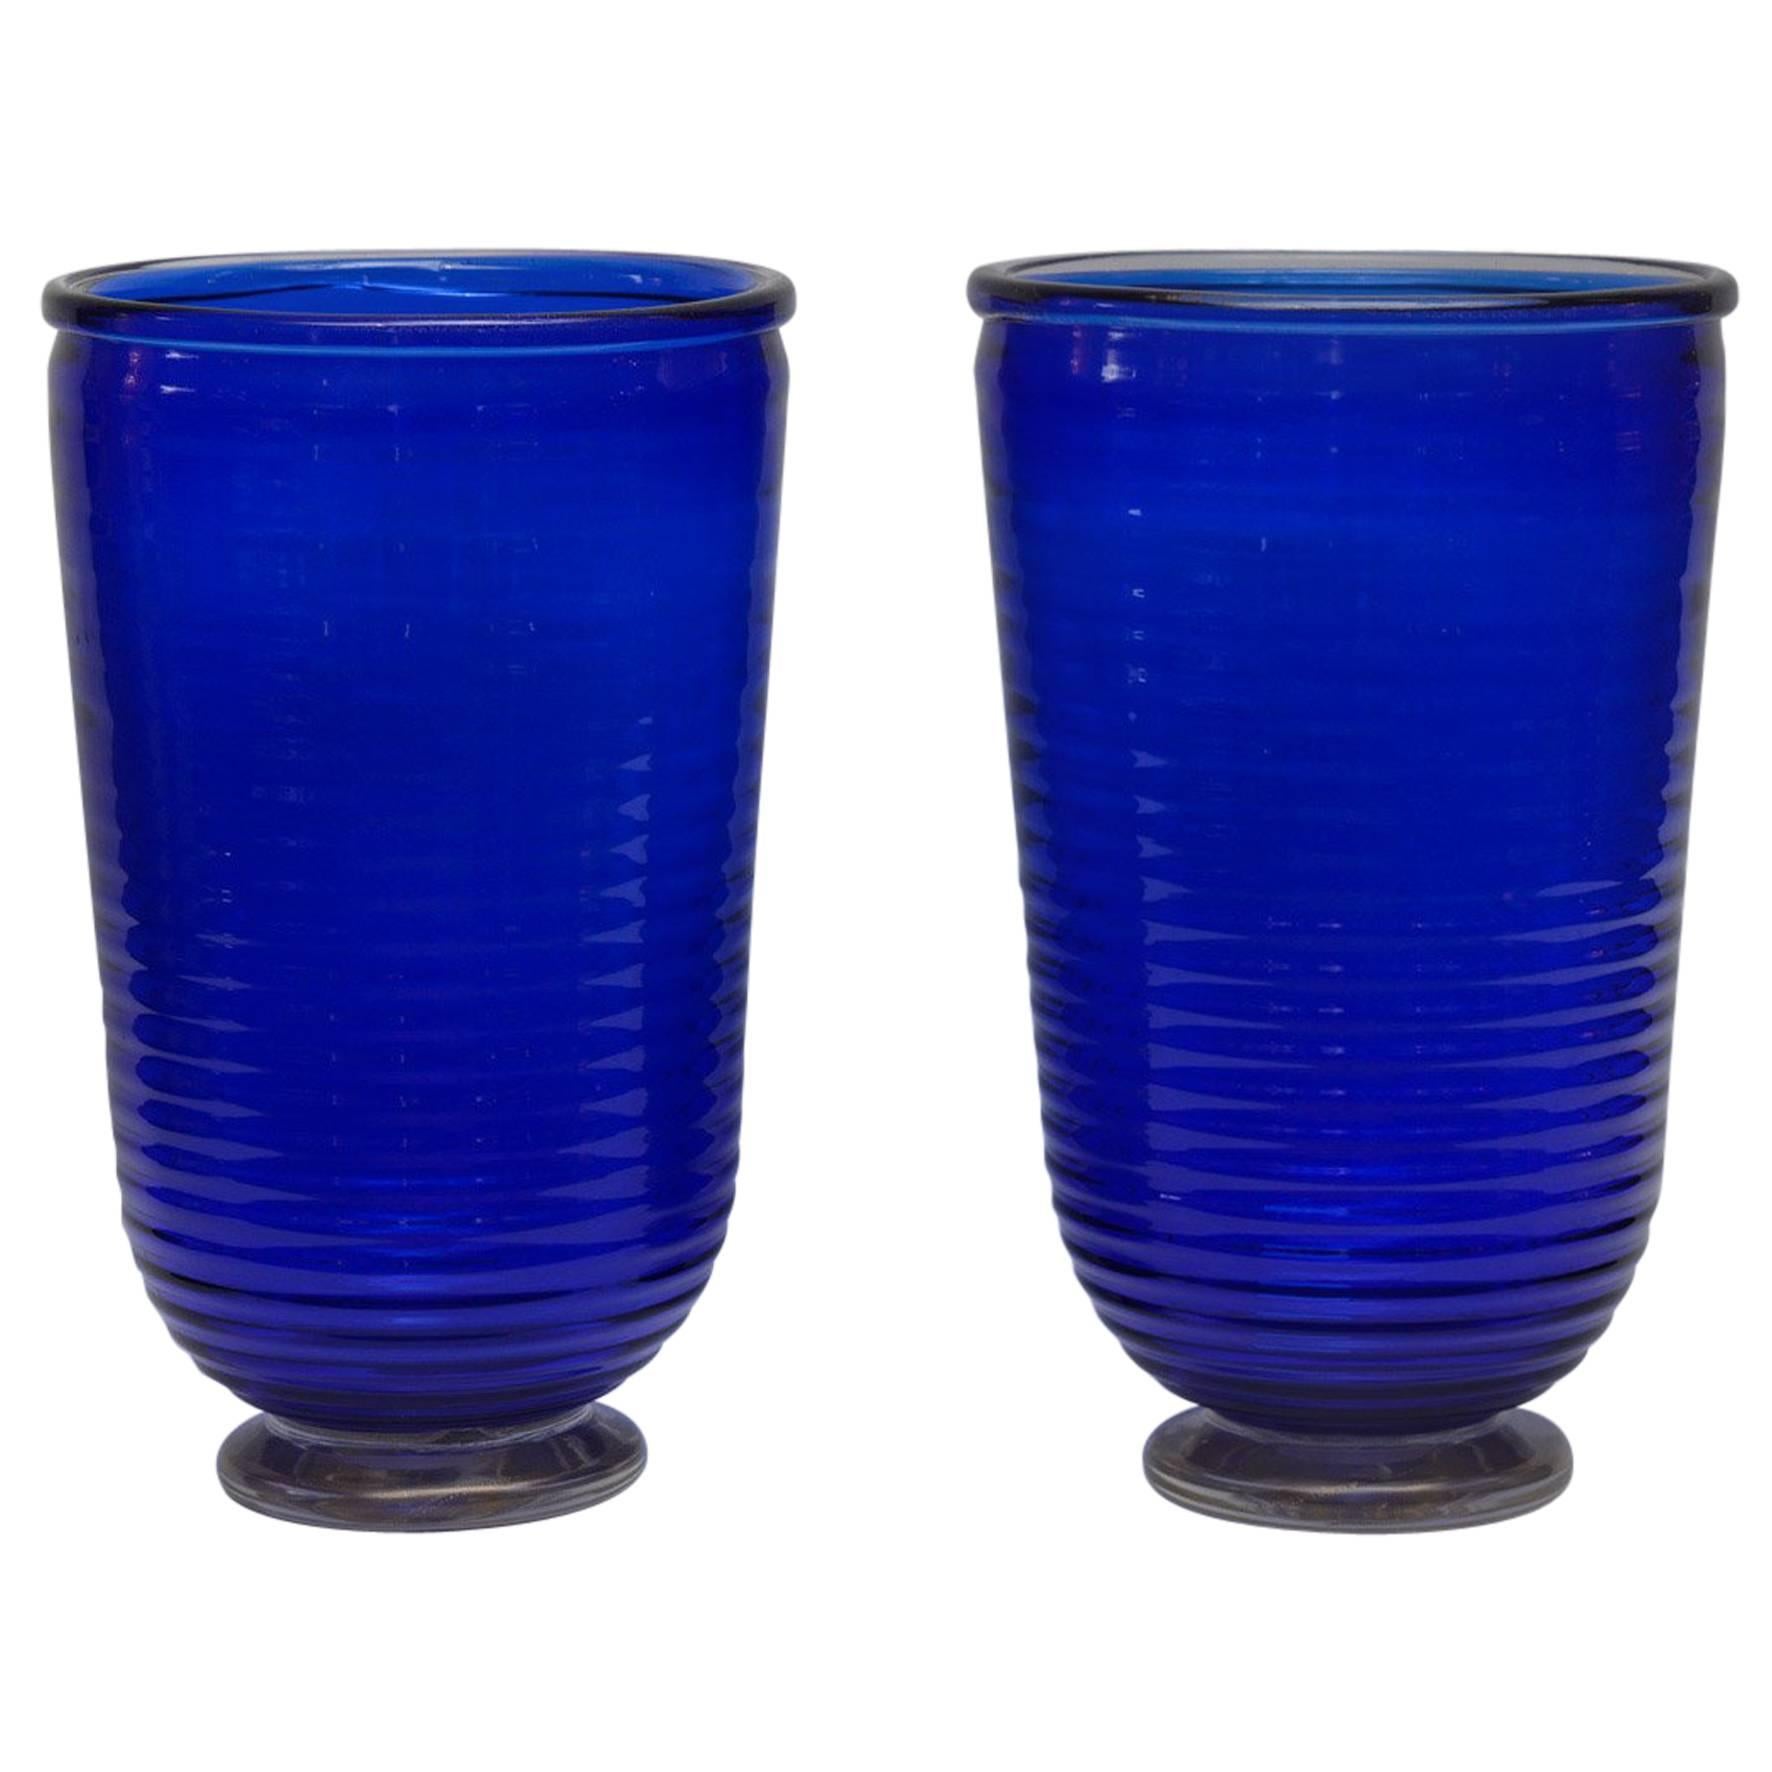 Pair of Vases in Blue Murano Glass Signed by Toso